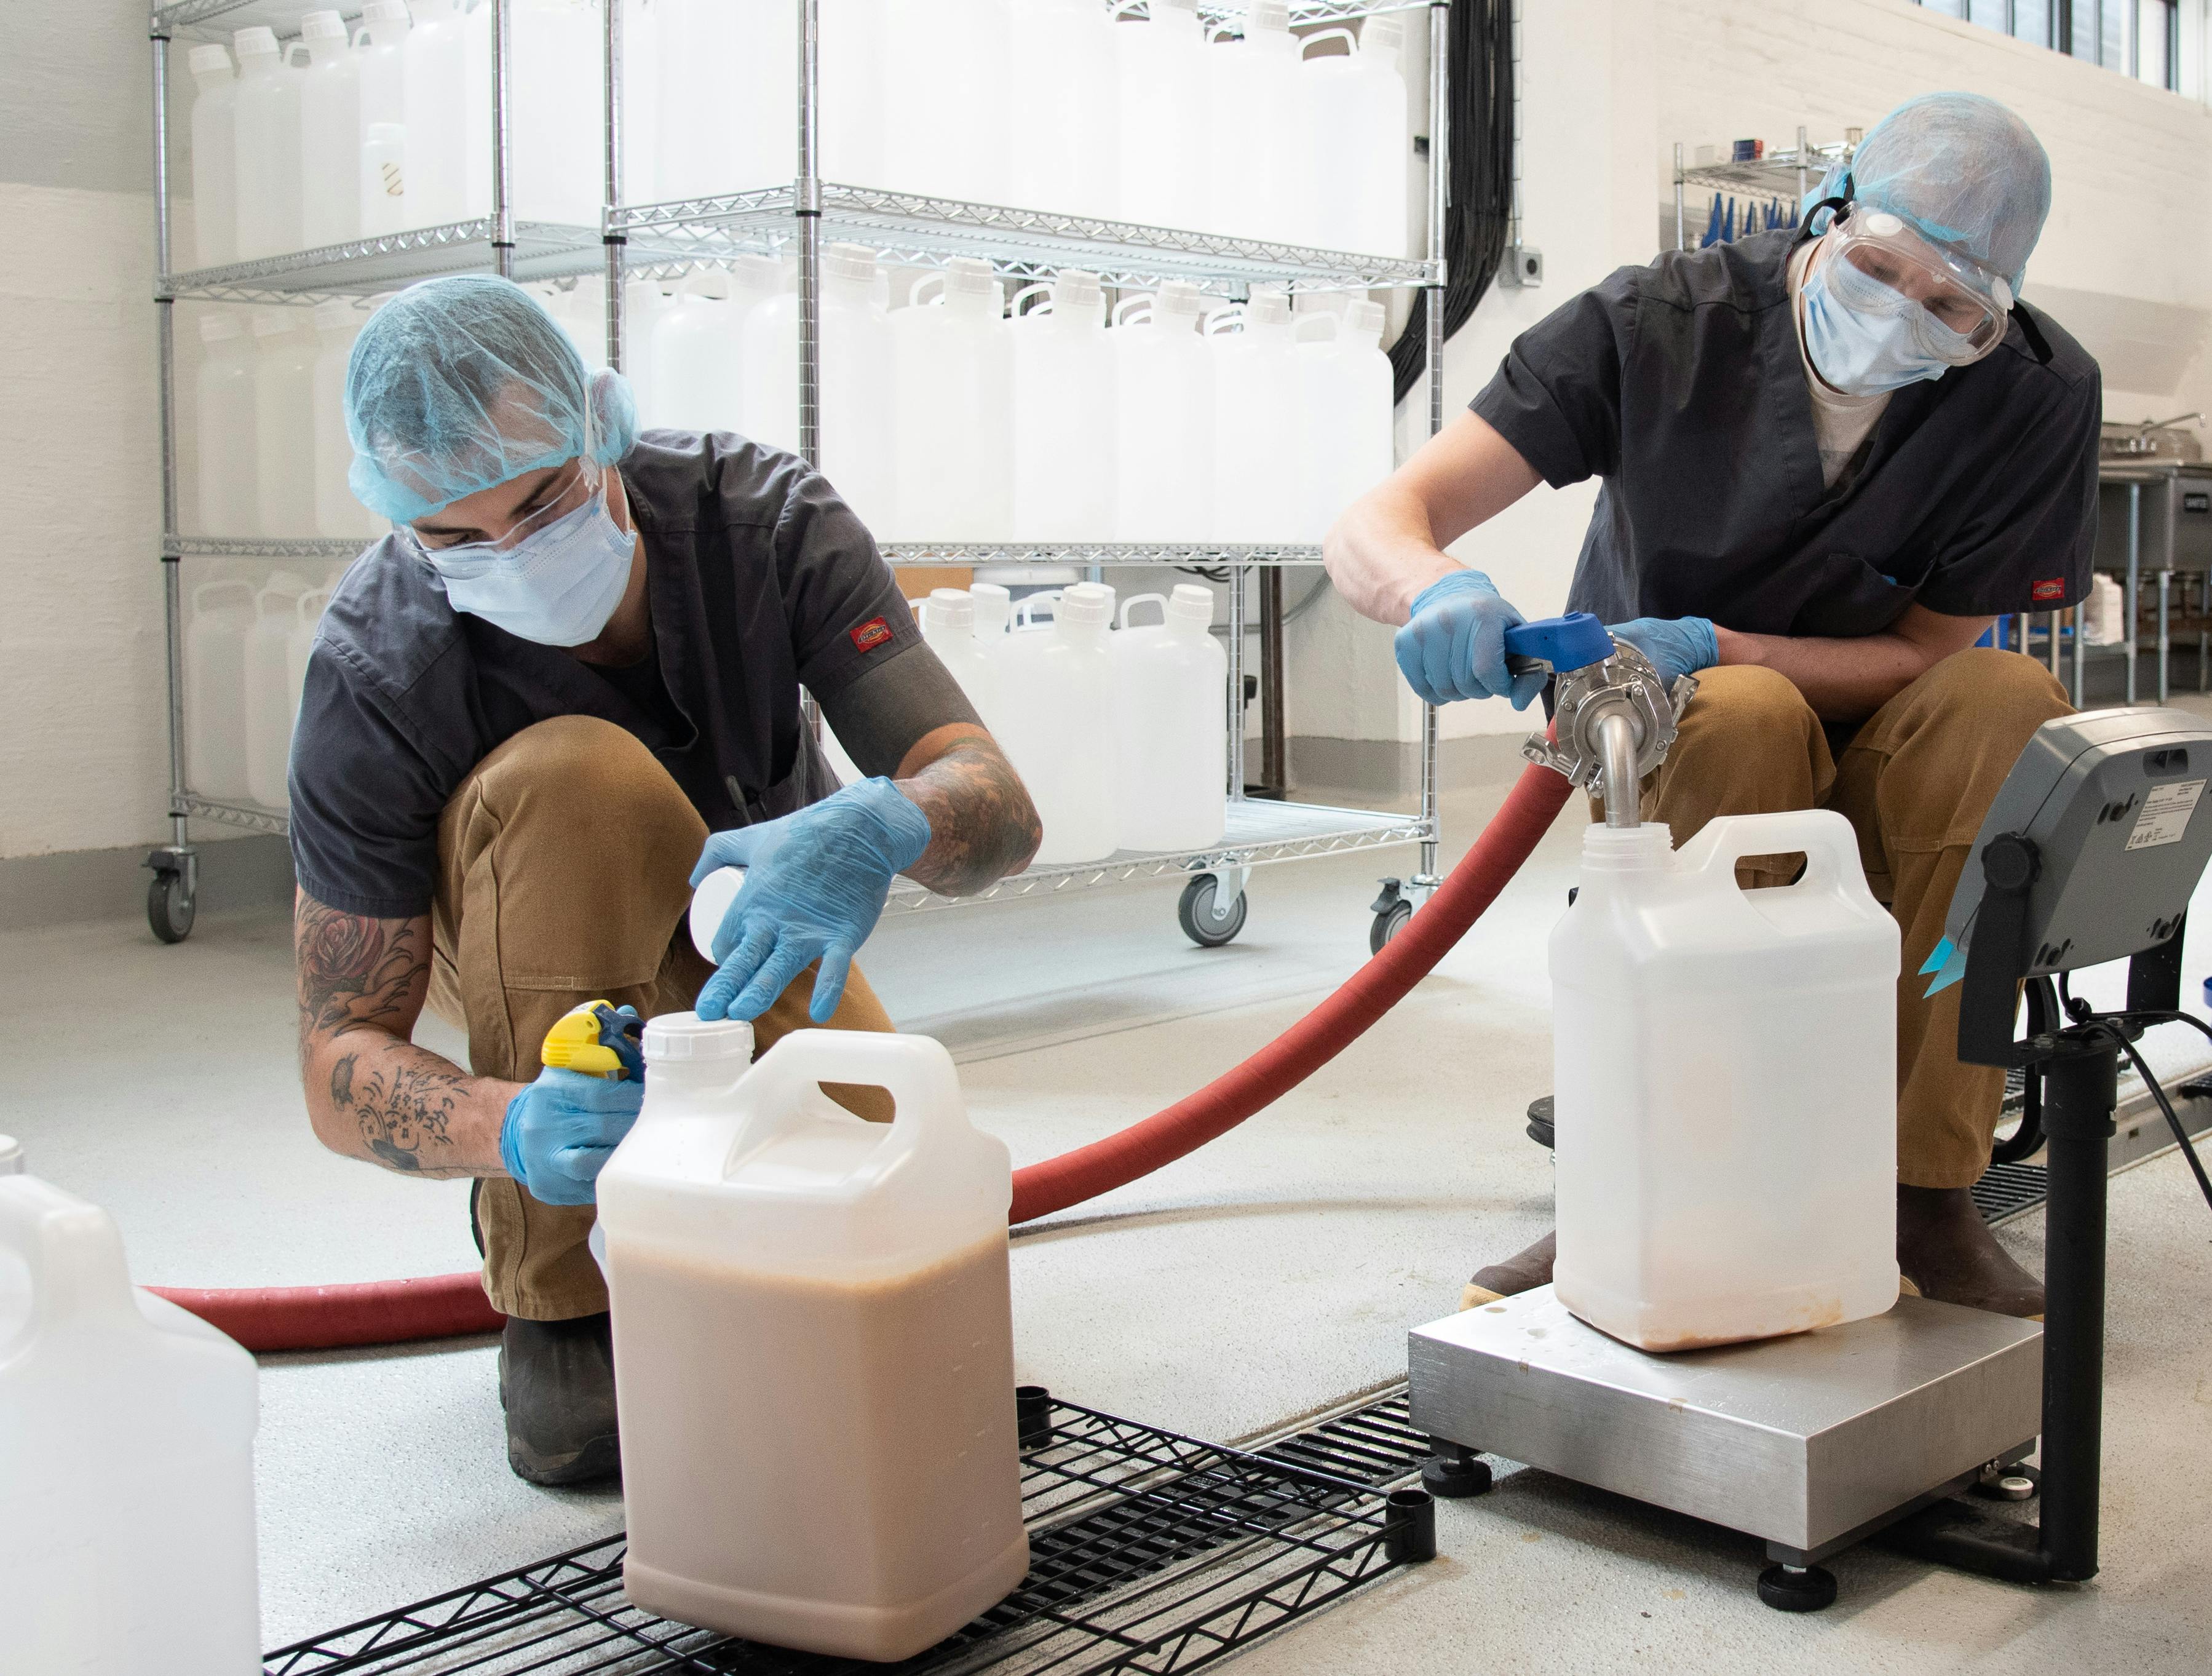 Photo from an Imperial Yeast production facility.